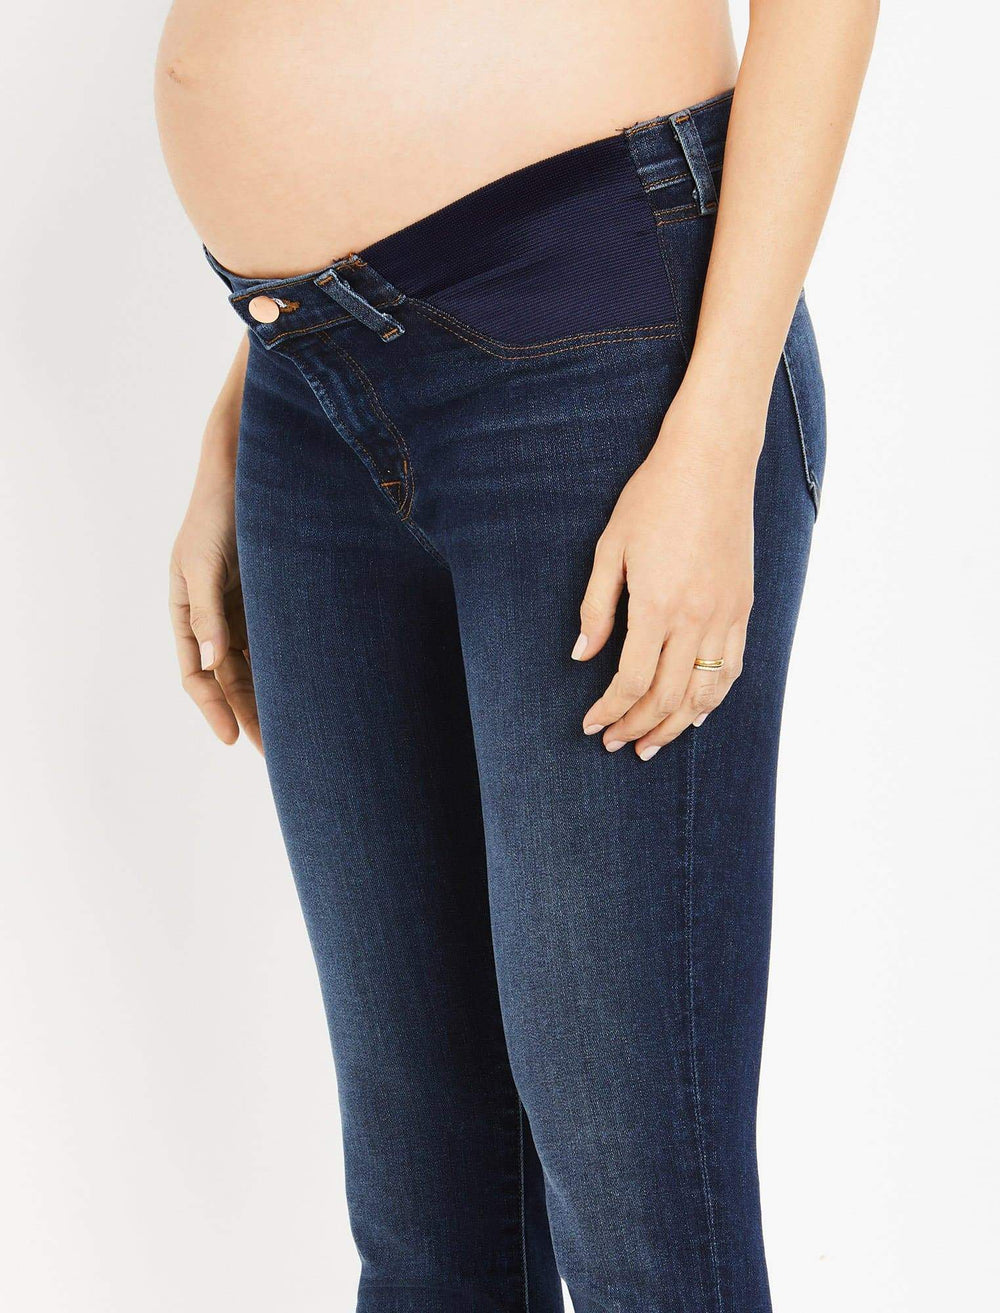 J Brand Side Panel Mama J Super Skinny Maternity Jeans - A Pea In the Pod